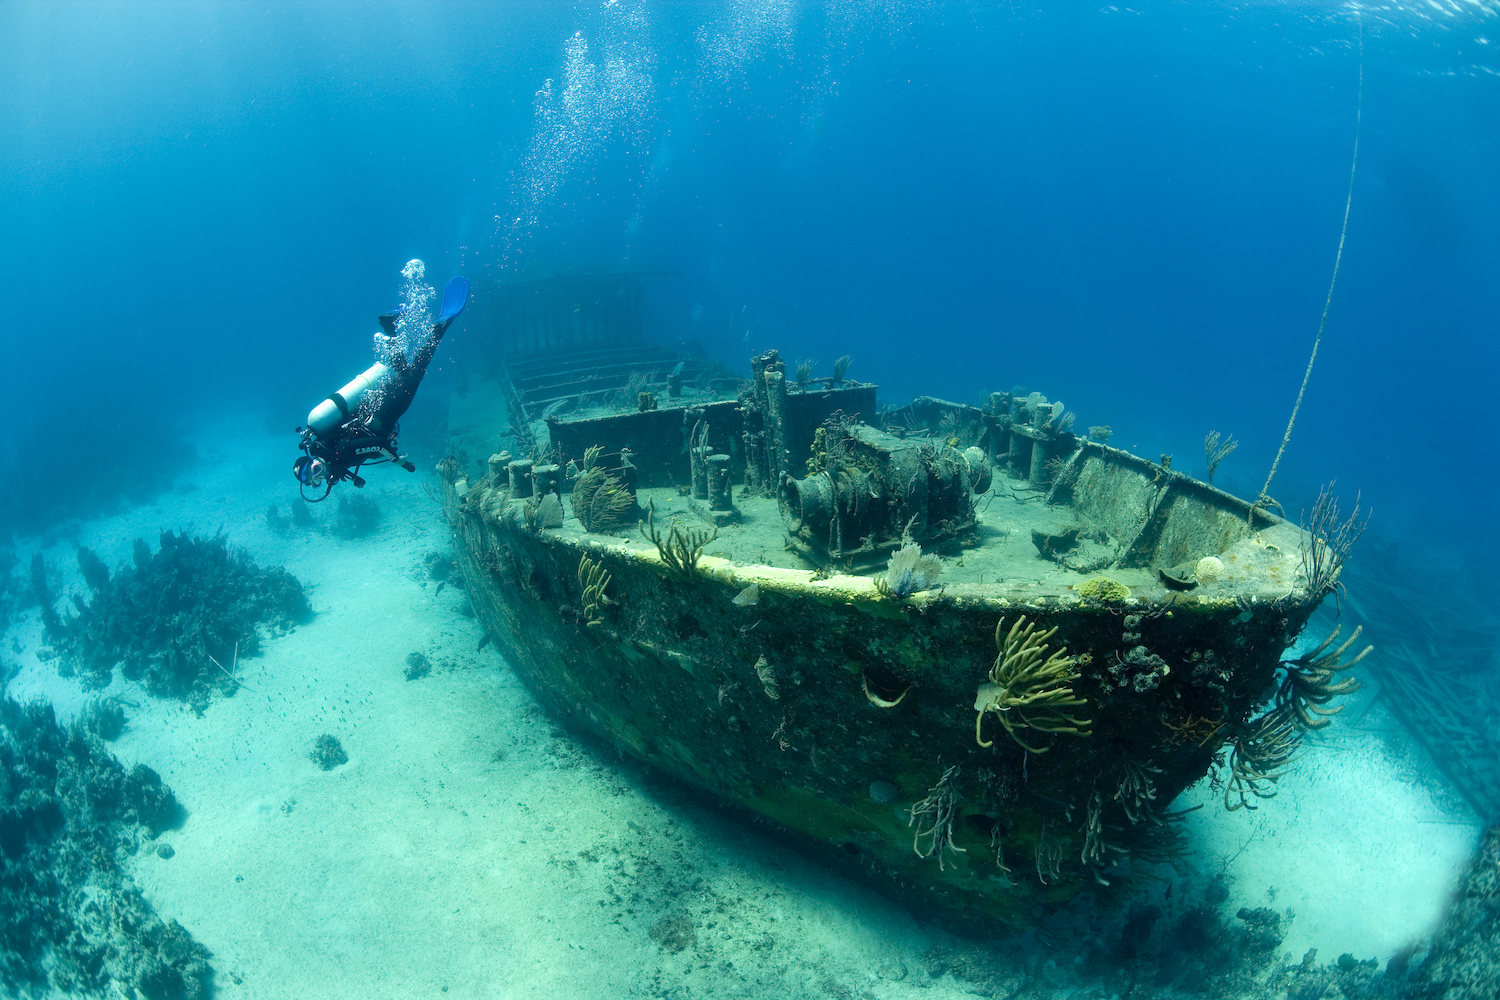 Scuba Diver Exploring a Large Shipwreck in the bahamas. A sunken treasure of booze and gold is planning to be excavated in Lake Michigan soon.